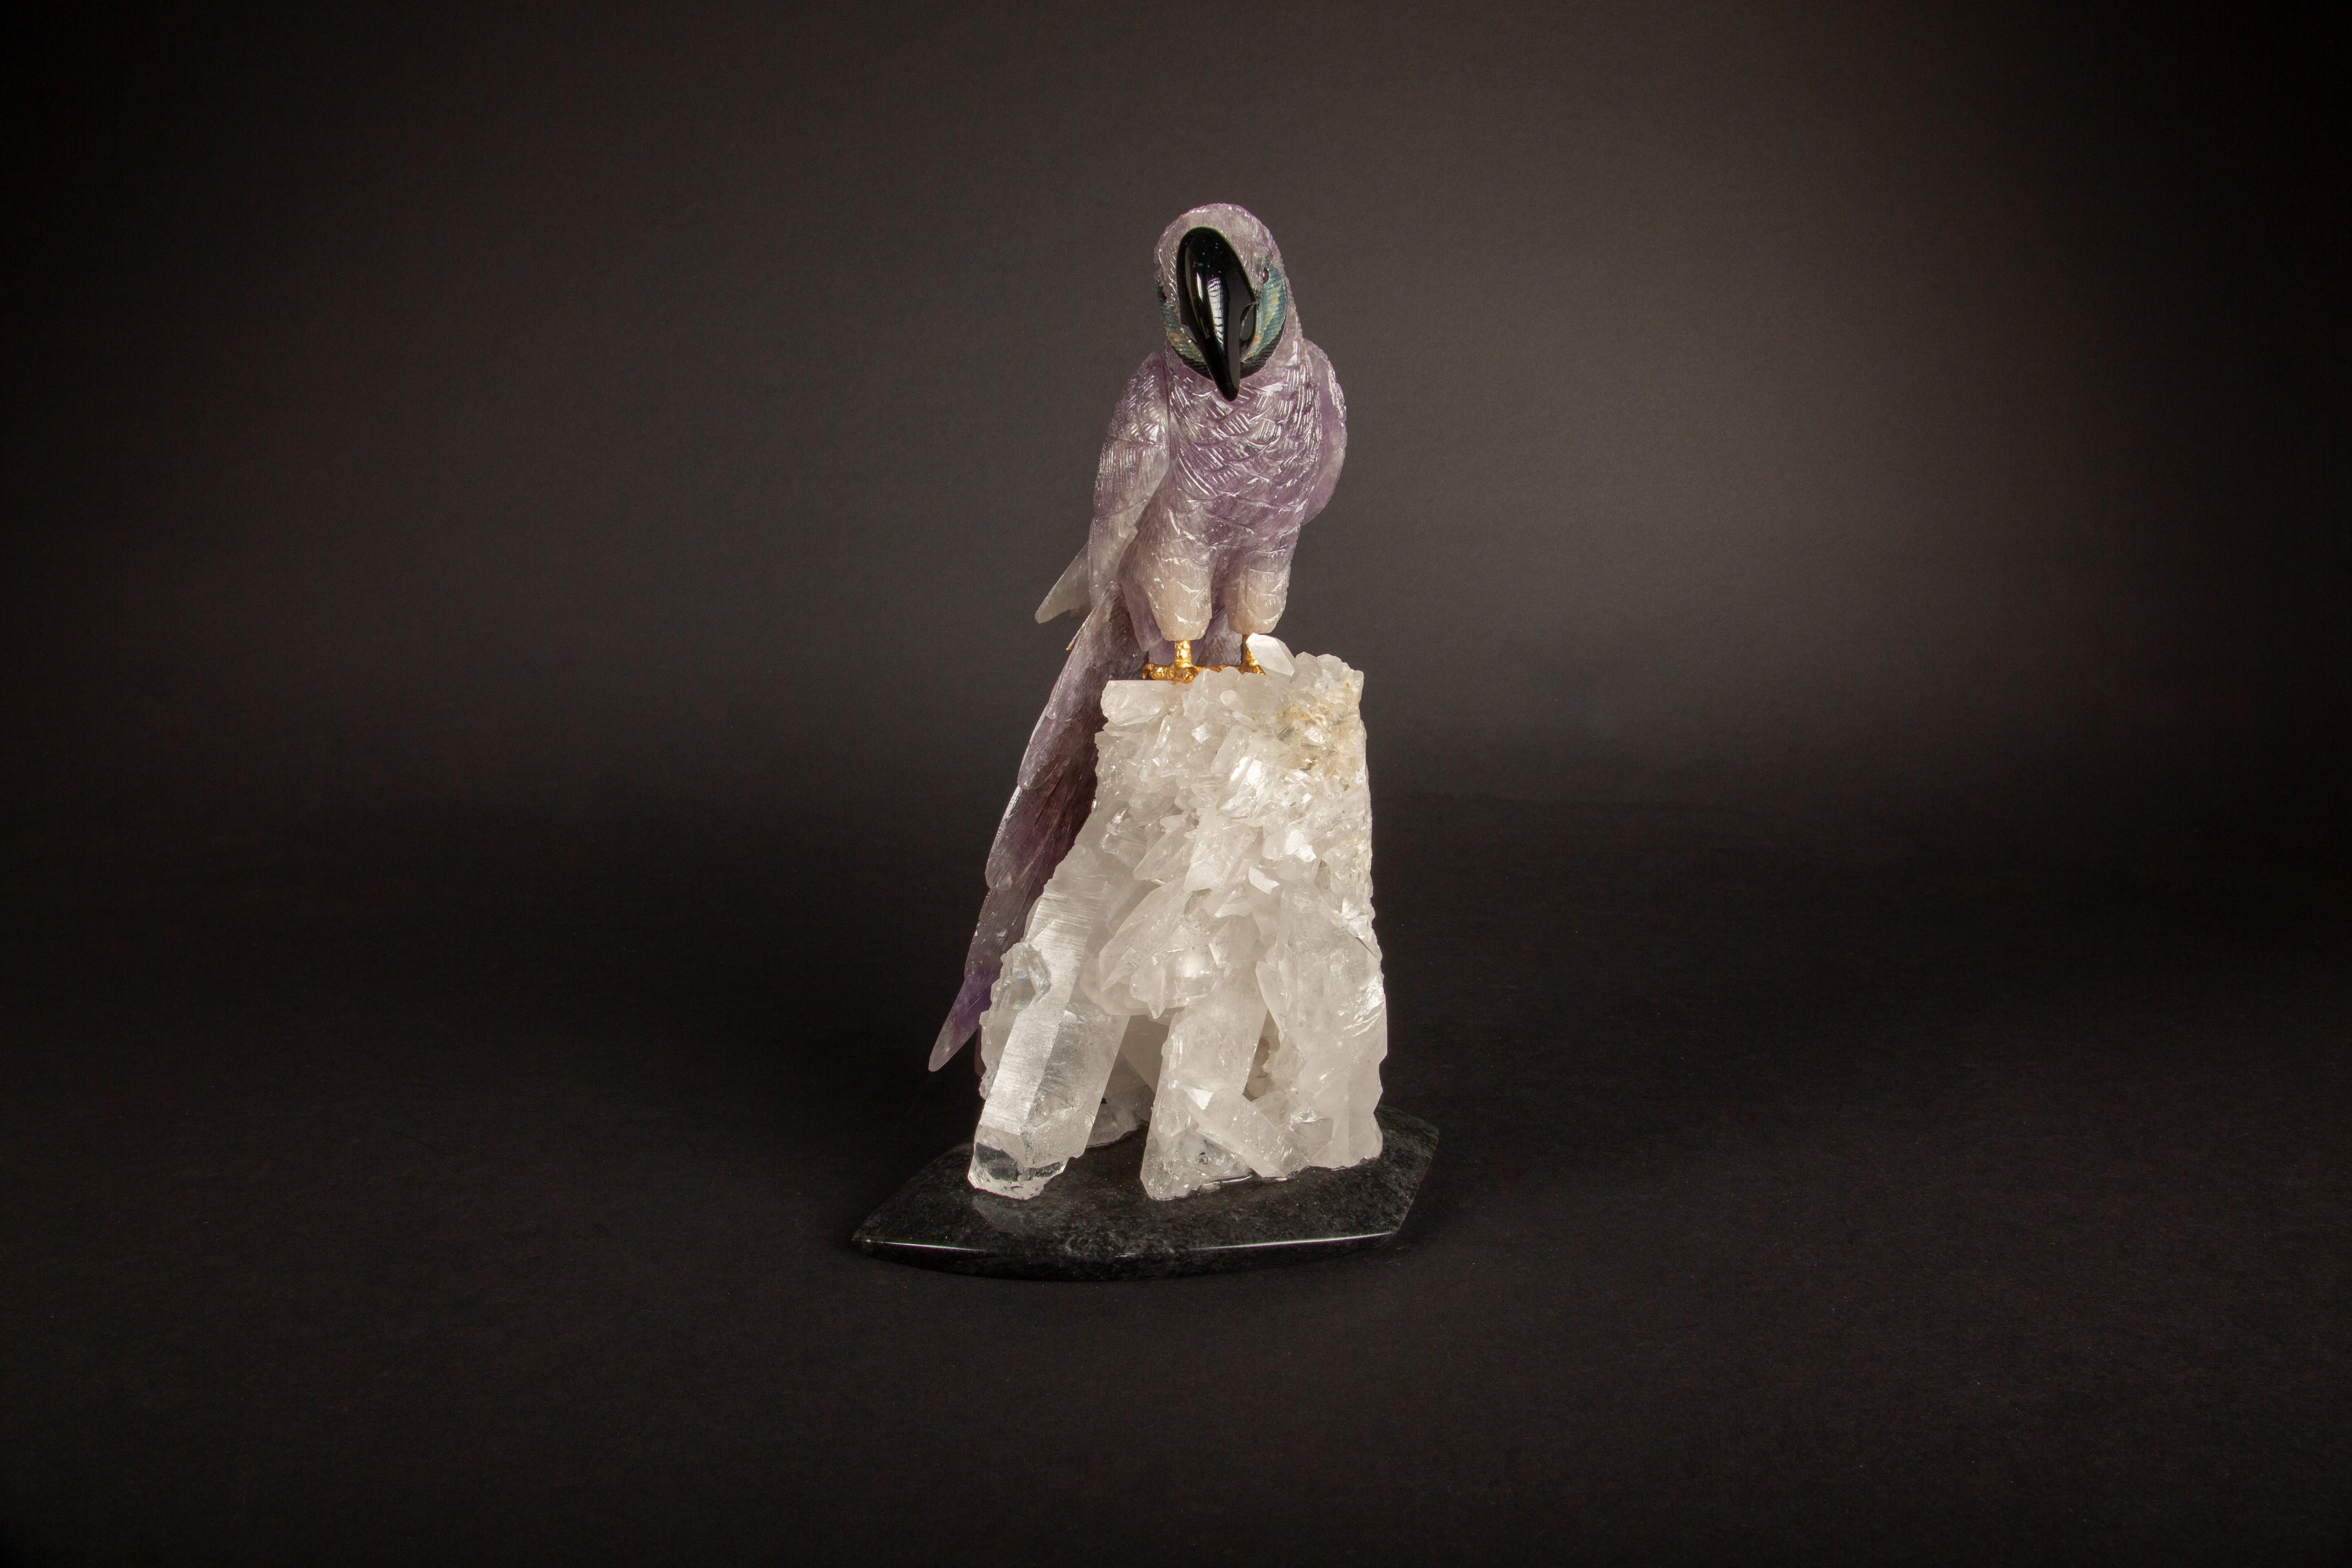 This exquisite 10.5-inch high carved vibrant amethyst parrot, meticulously handcrafted in Argentina, presents a stunning depiction of artisanal craftsmanship. Perched atop a rock crystal cluster, the sculpture captures the essence of natural beauty